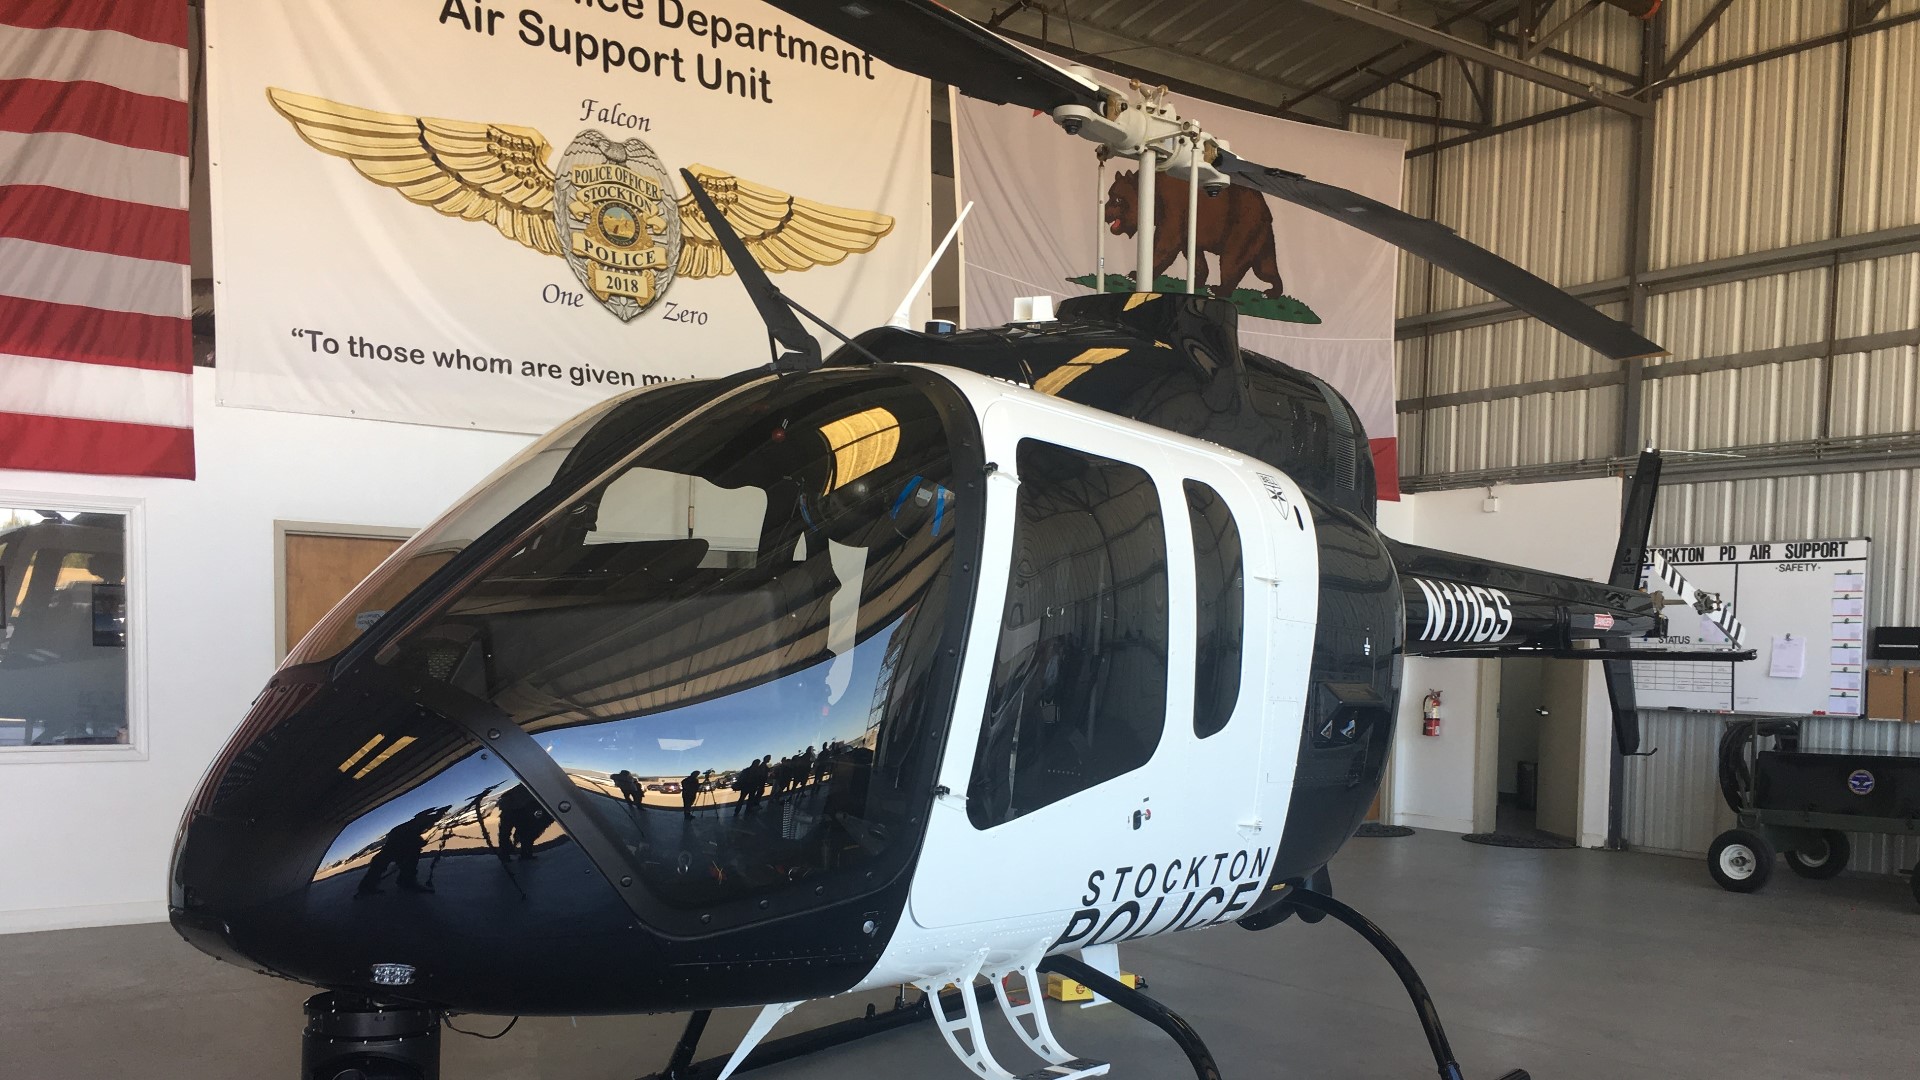 It's the first of its kind in Stockton Police Department history. The Falcon One Zero, Bell 505 Jet Ranger X helicopter has been in the air above the city since June 24.